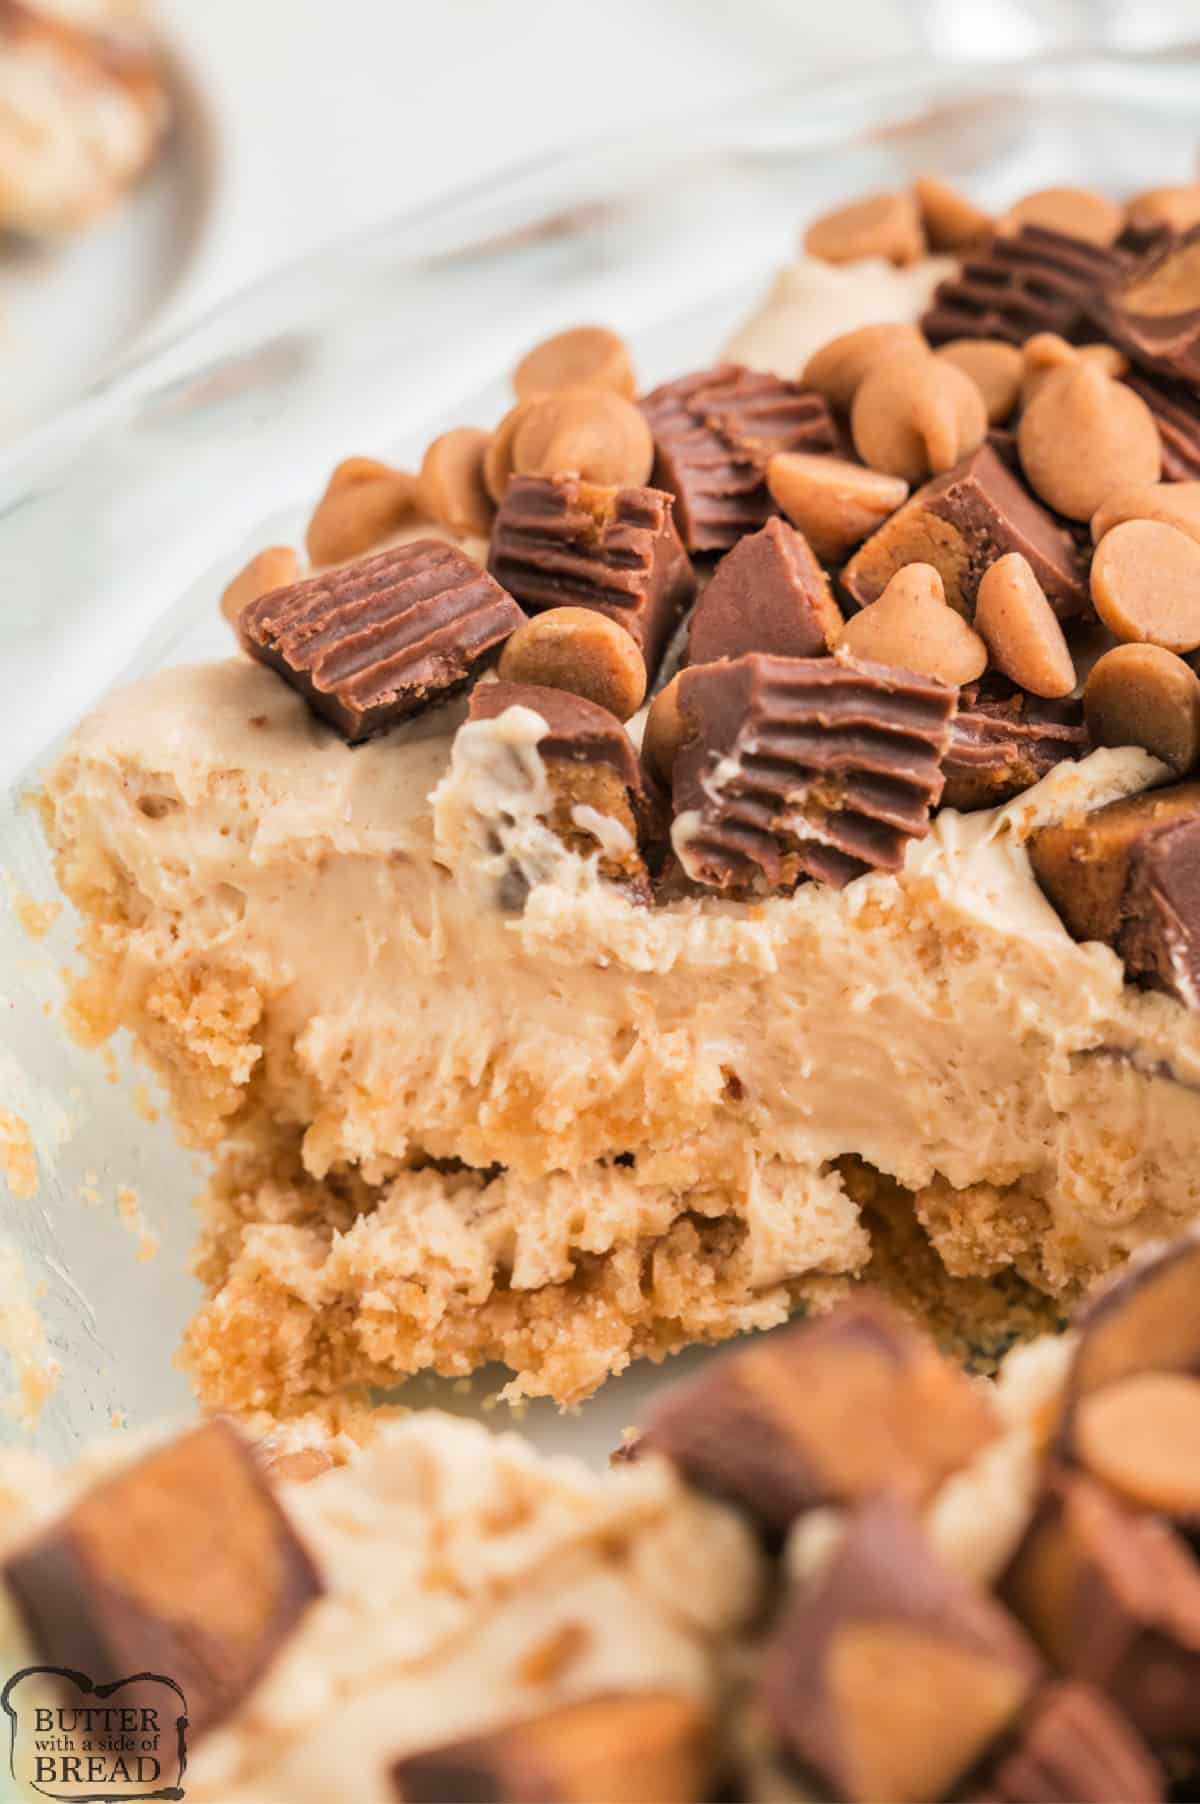 Reese's Peanut Butter Cup Pie is made with a simple vanilla wafer crust and a creamy peanut butter filling. This simple pie recipe is packed with Reese's Peanut Butter cups!